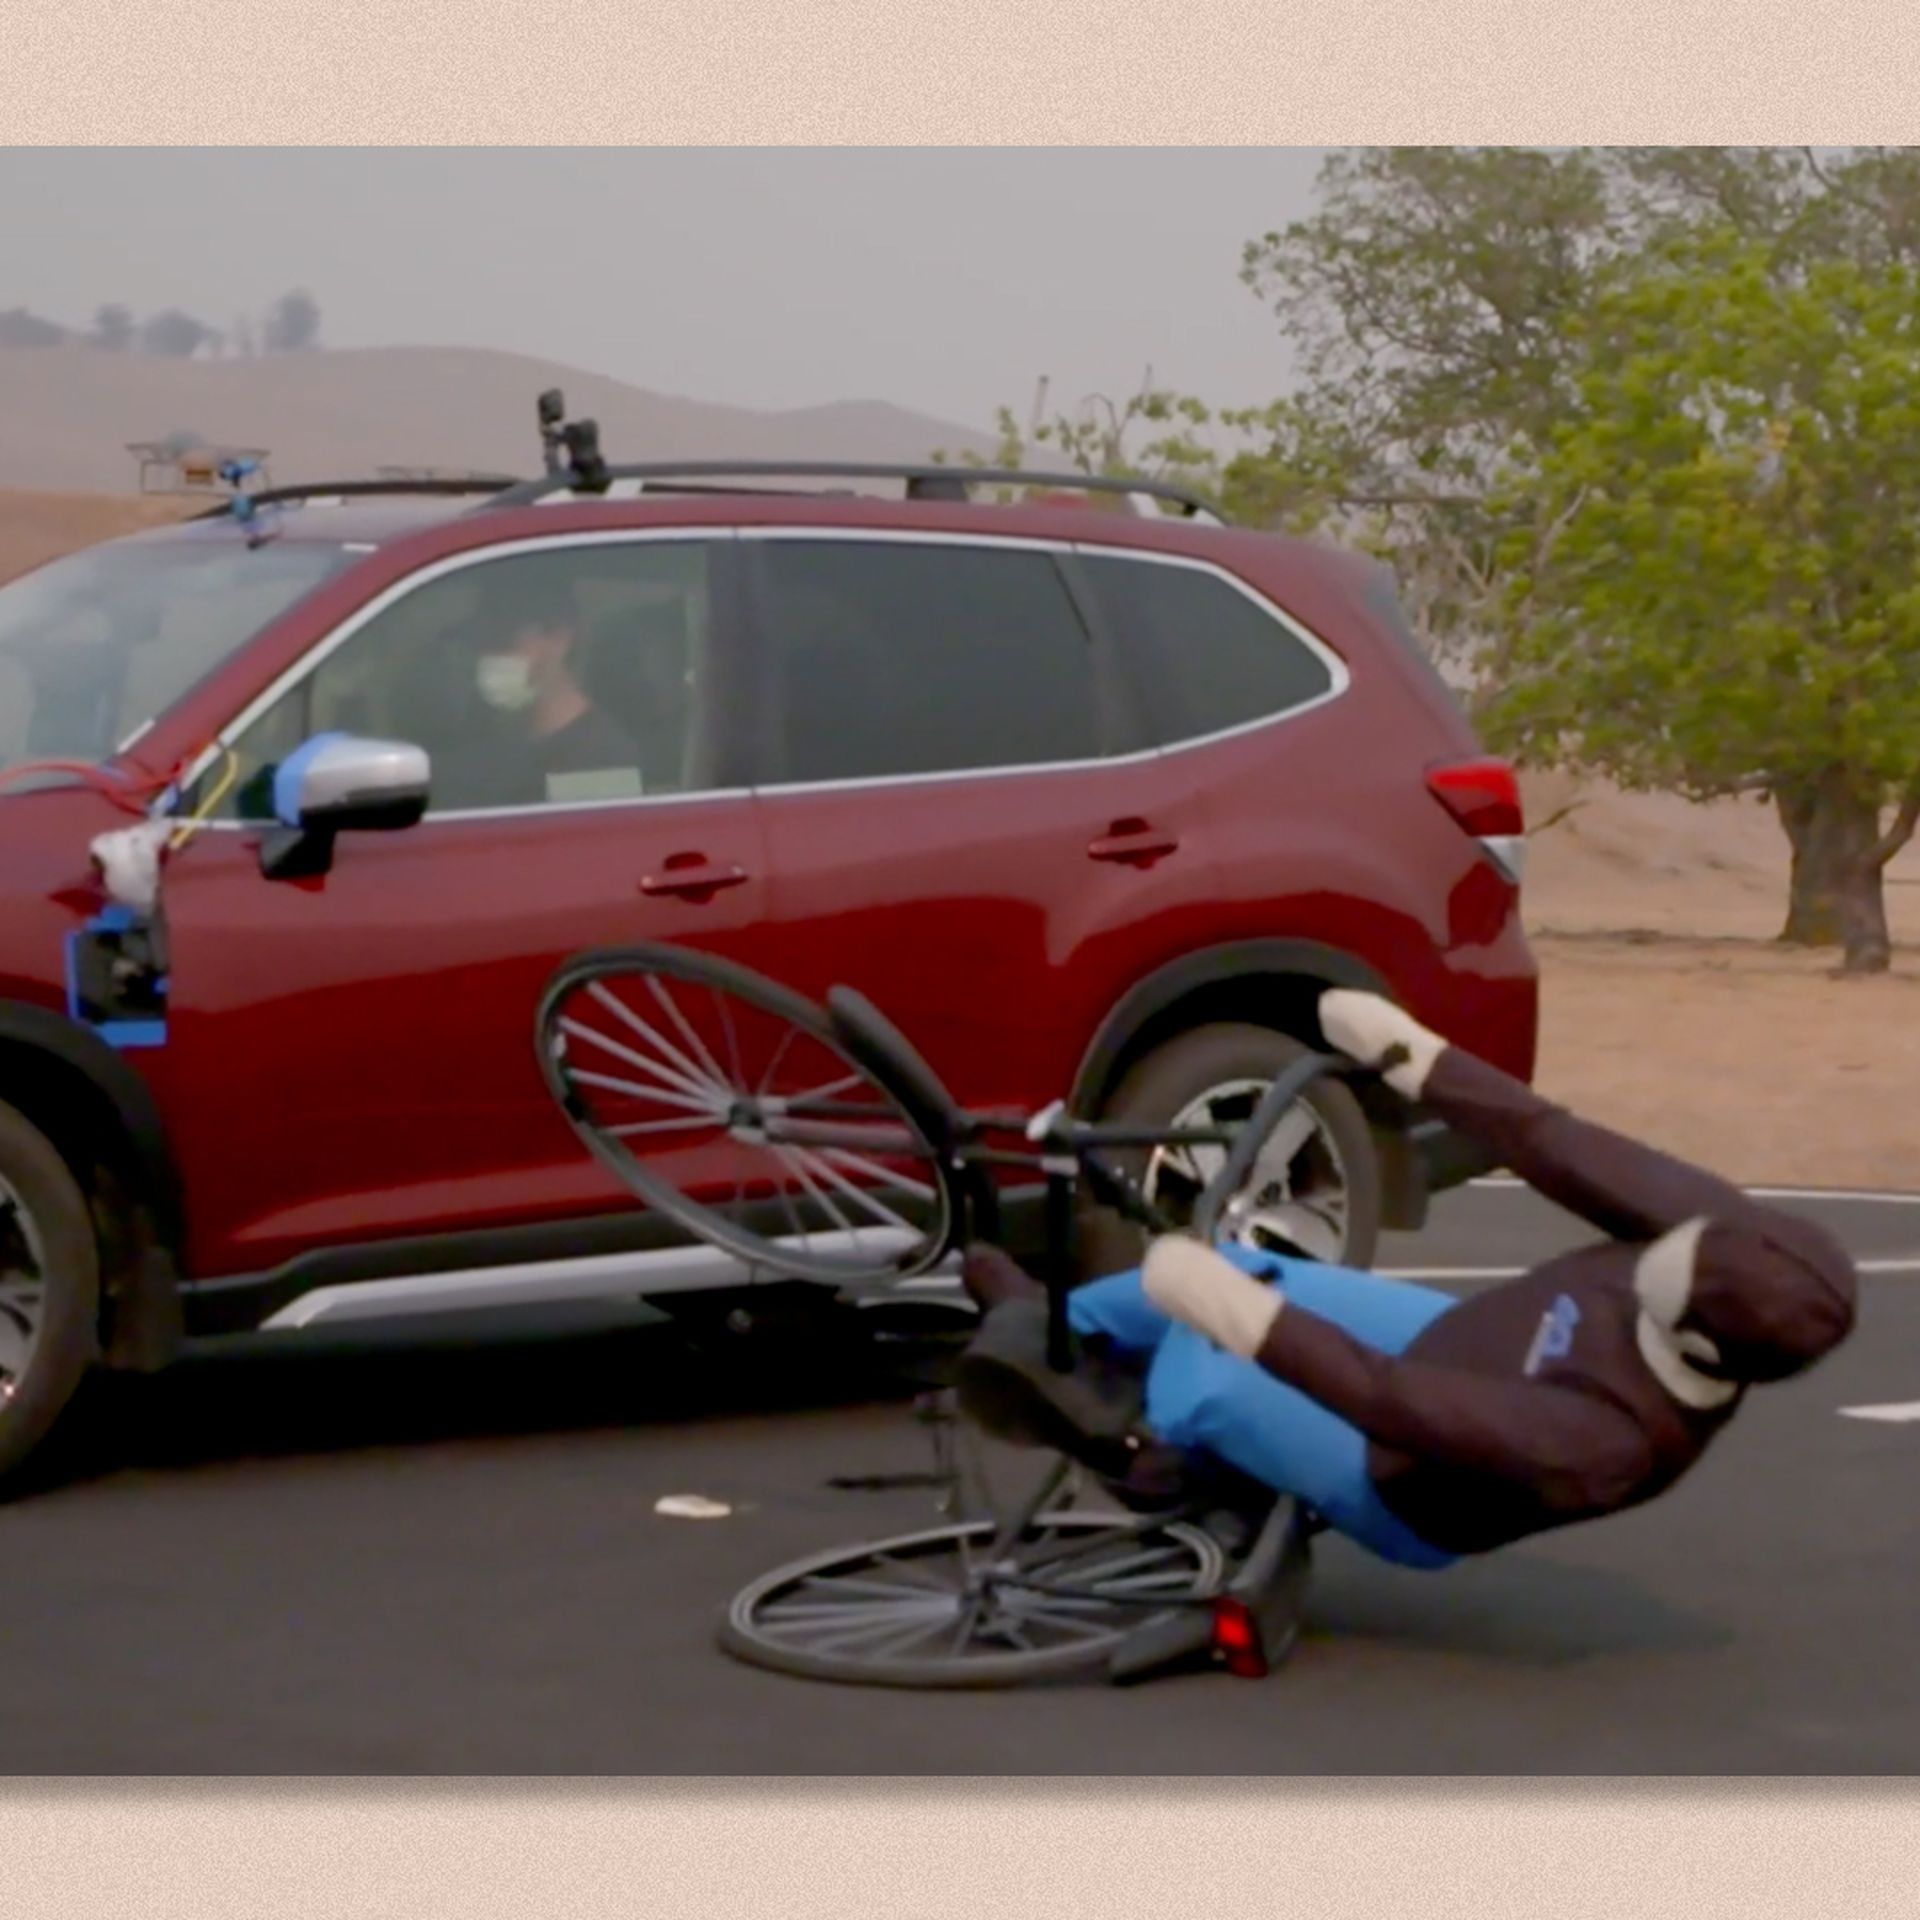 Screenshot from a crash video showing a dummy cyclist being hit by a car